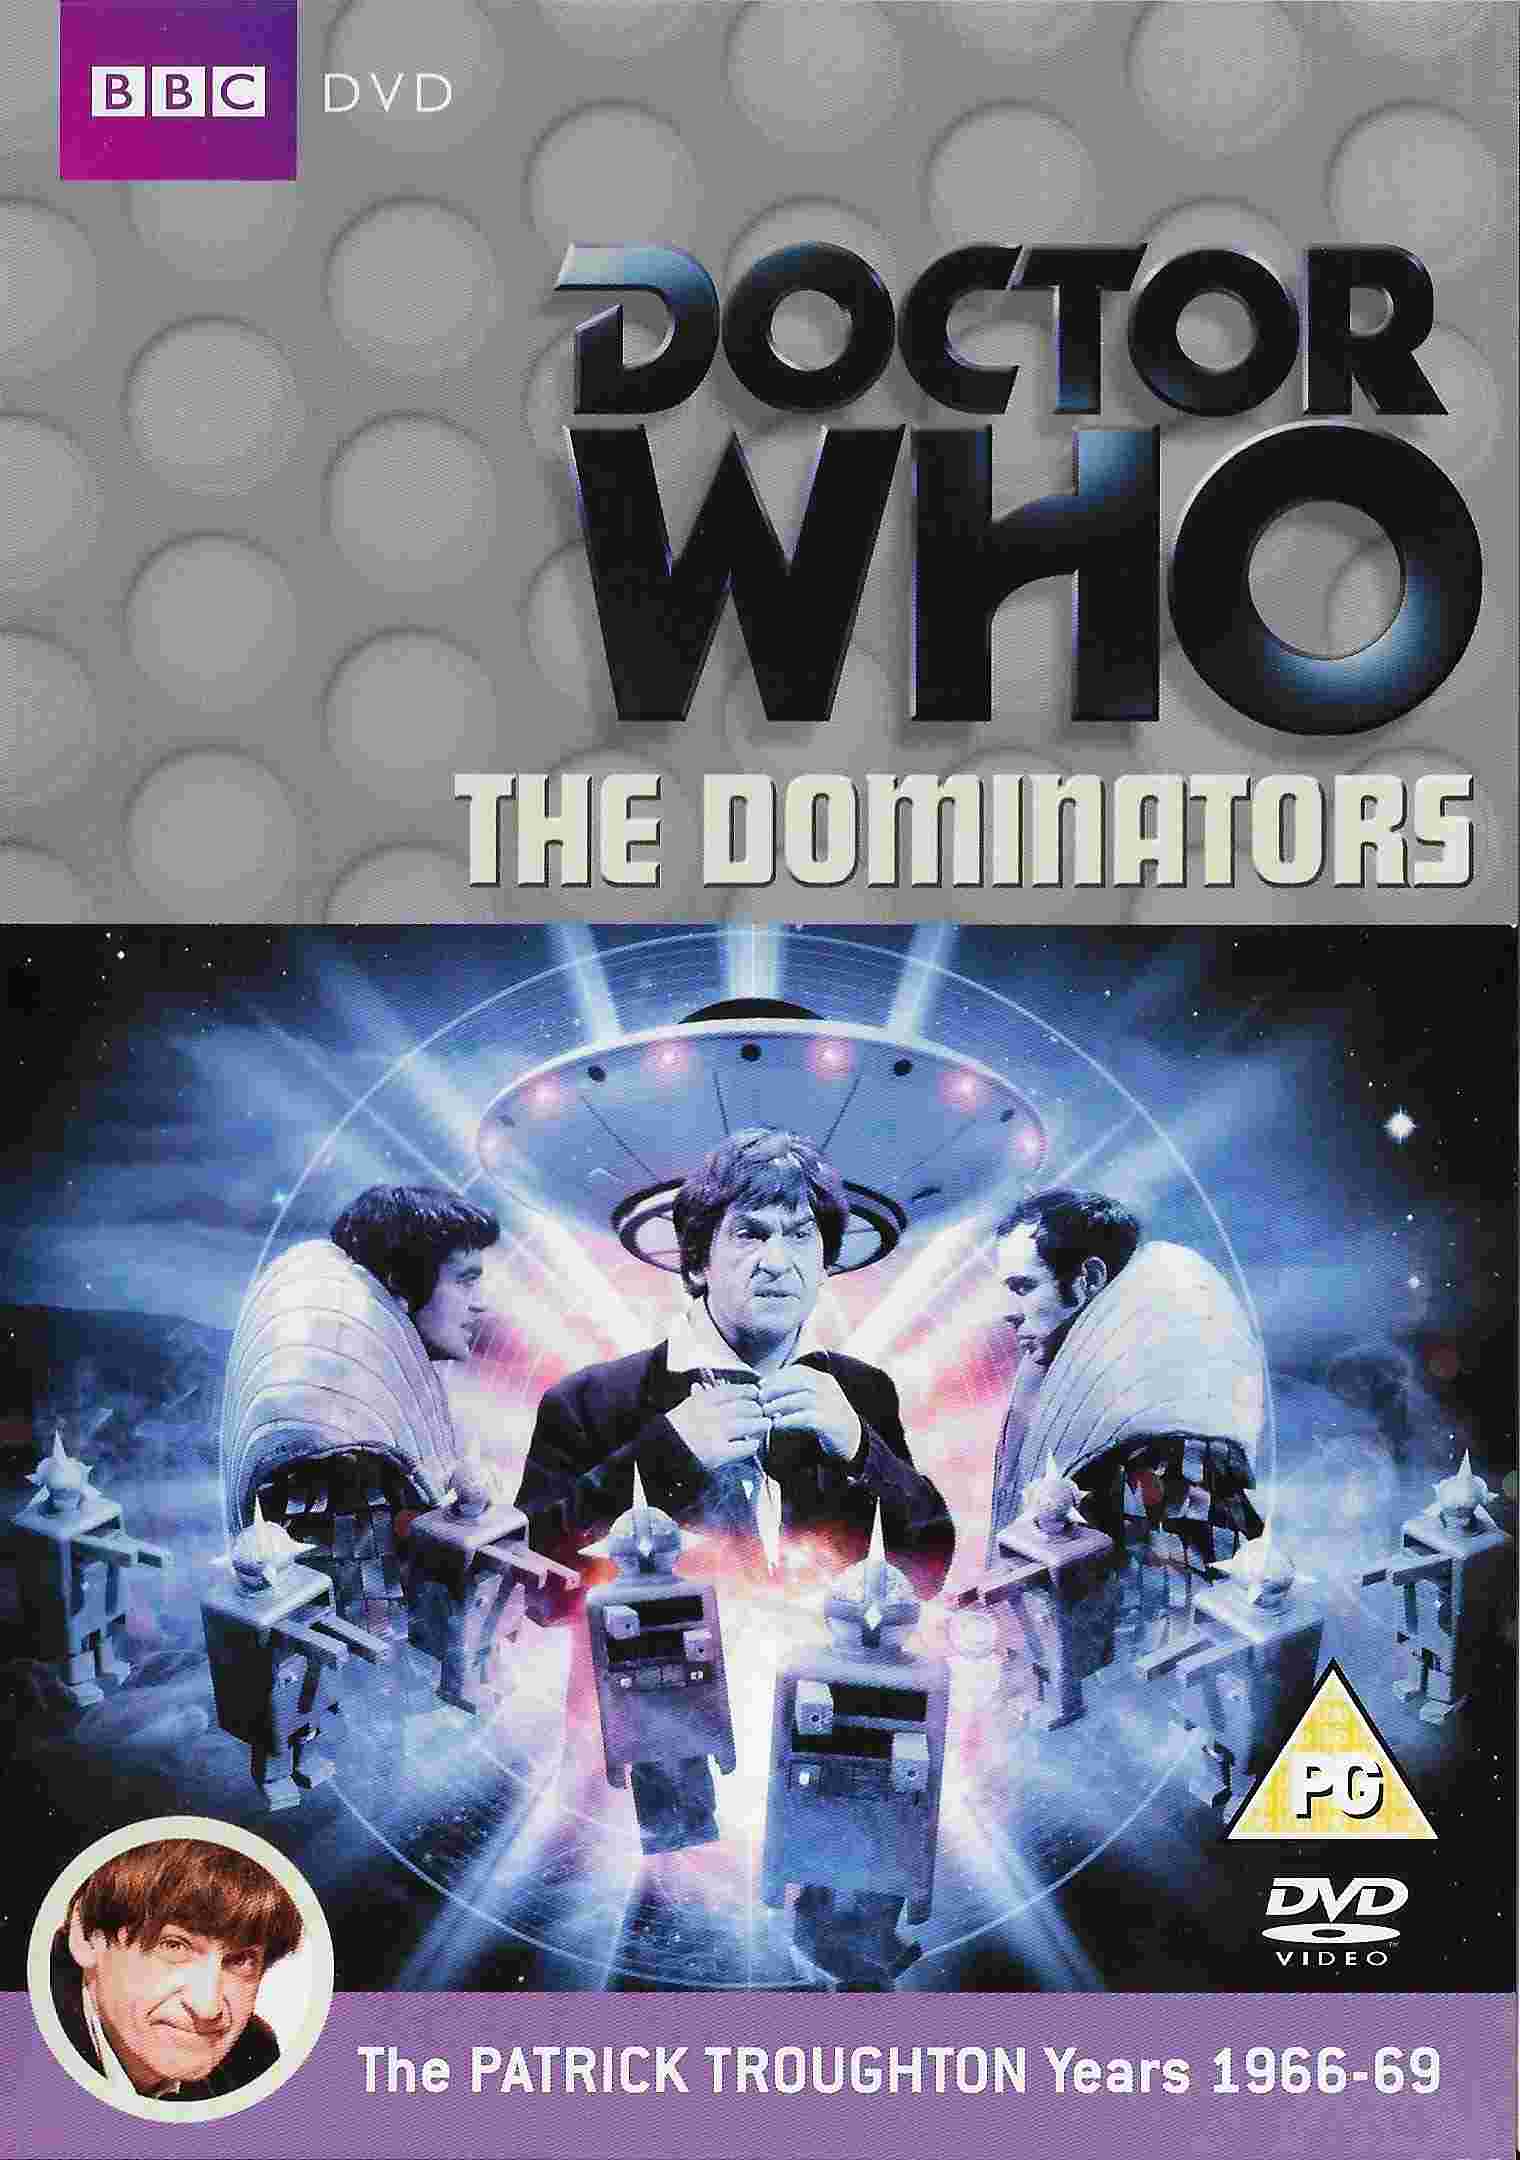 Picture of BBCDVD 2807 Doctor Who - The Dominators by artist Norman Ashby from the BBC records and Tapes library